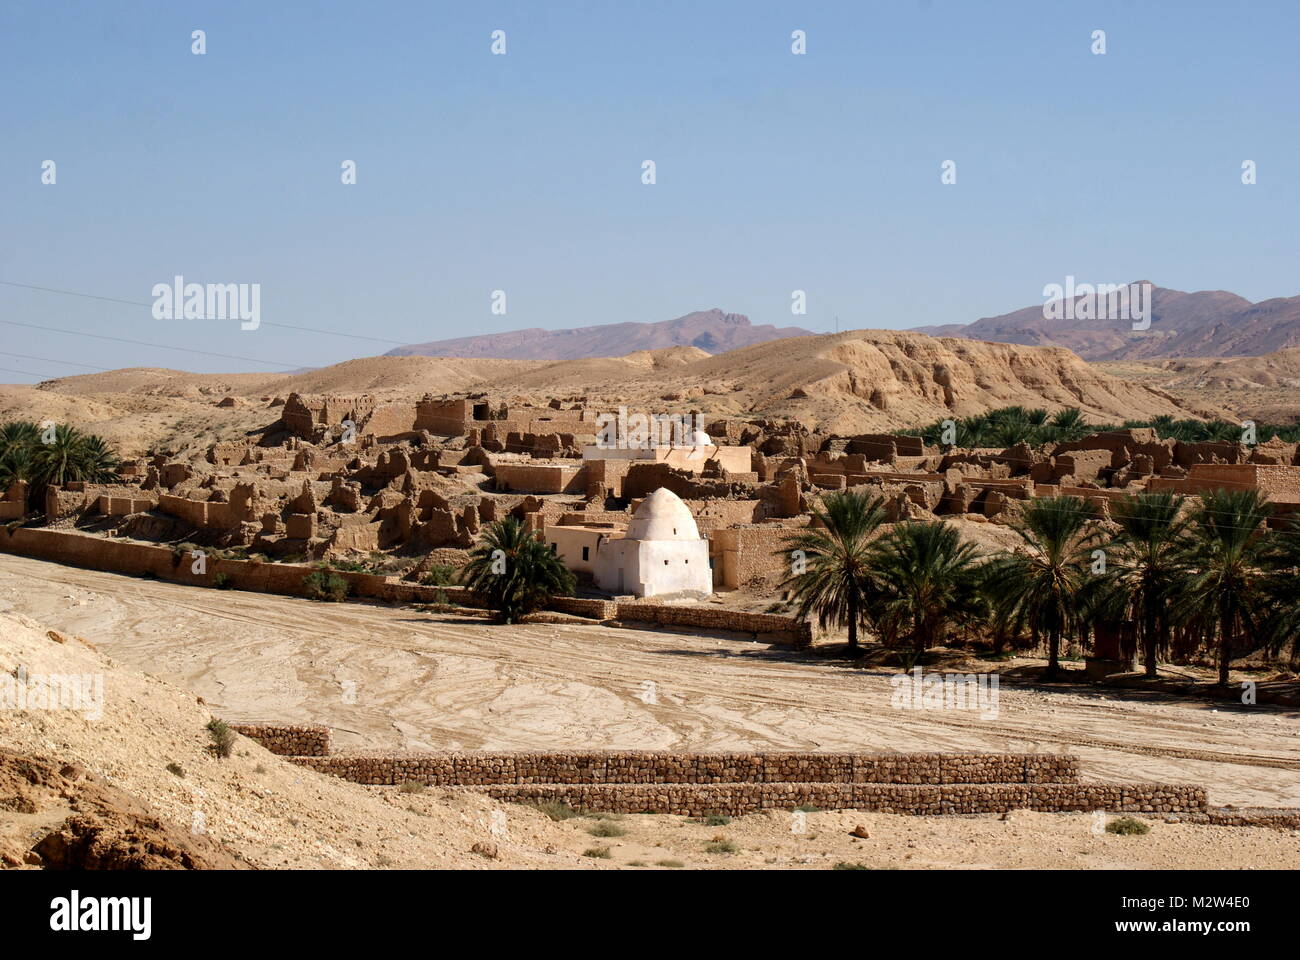 The dry riverbed and abandoned old town of Tamerza, the largest mountain oasis in Tunisia, Tamerza, Tunisia Stock Photo